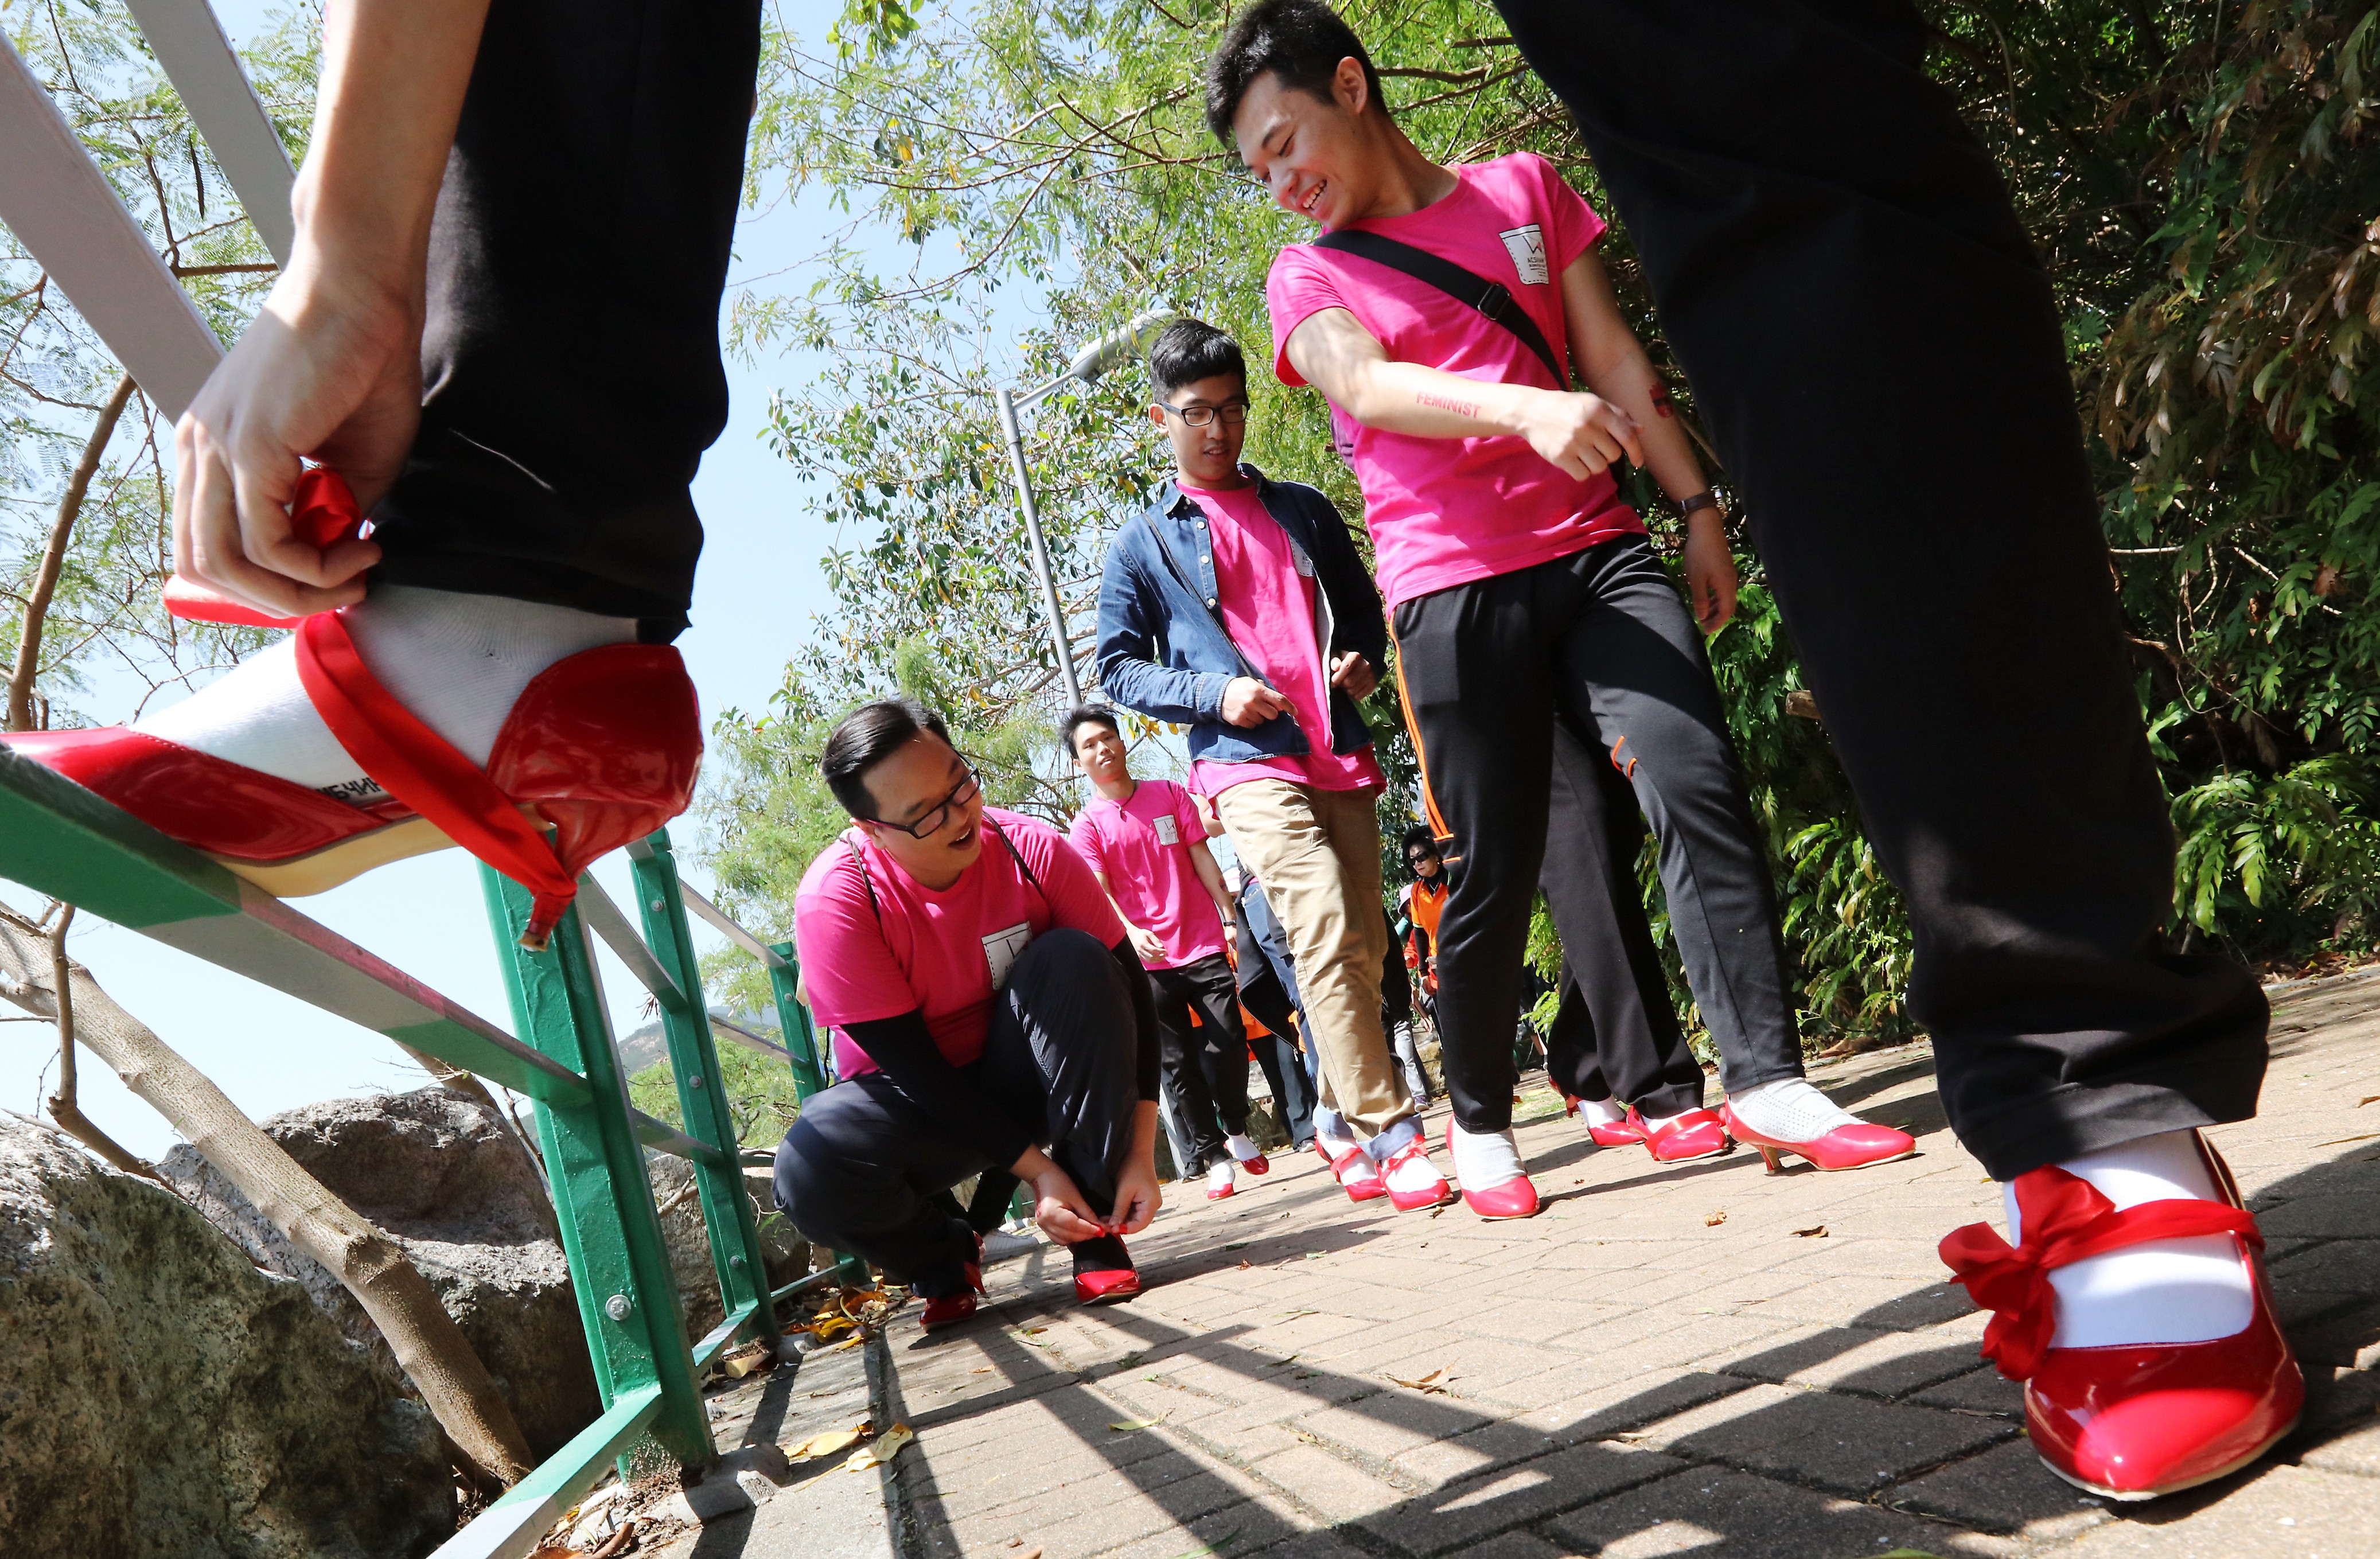 Men wear high heels to experience life as women in the Walk in Her Shoes charity event from Deep Water Bay to Seaview Promenade, in Hong Kong, in April 2017. Photo: Felix Wong